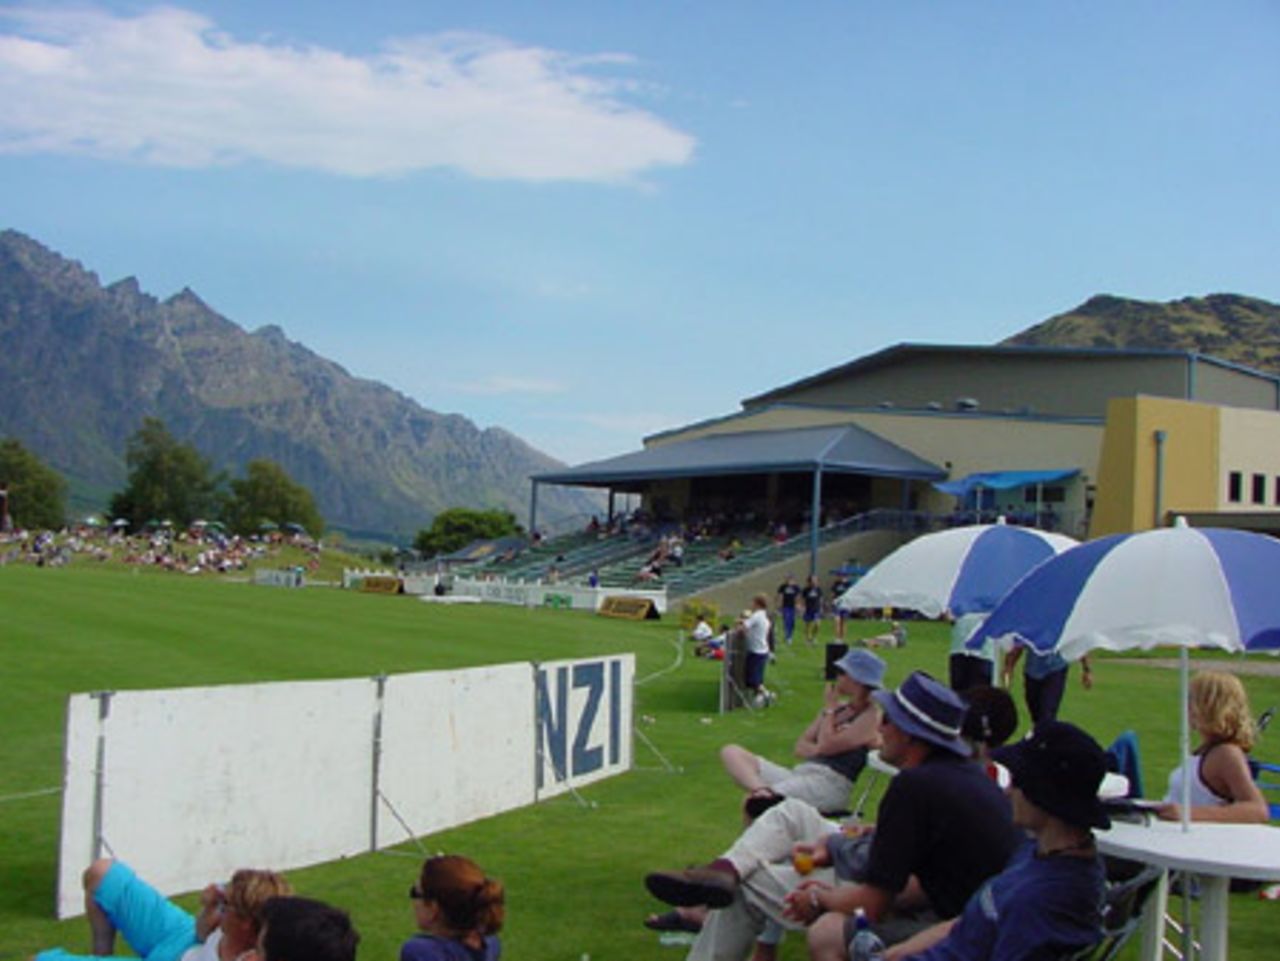 The John Davies Oval pavilion at the new ground based at the Queenstown Events Centre. State Shield: Otago v Wellington at John Davies Oval, Queenstown, 2 January 2002.